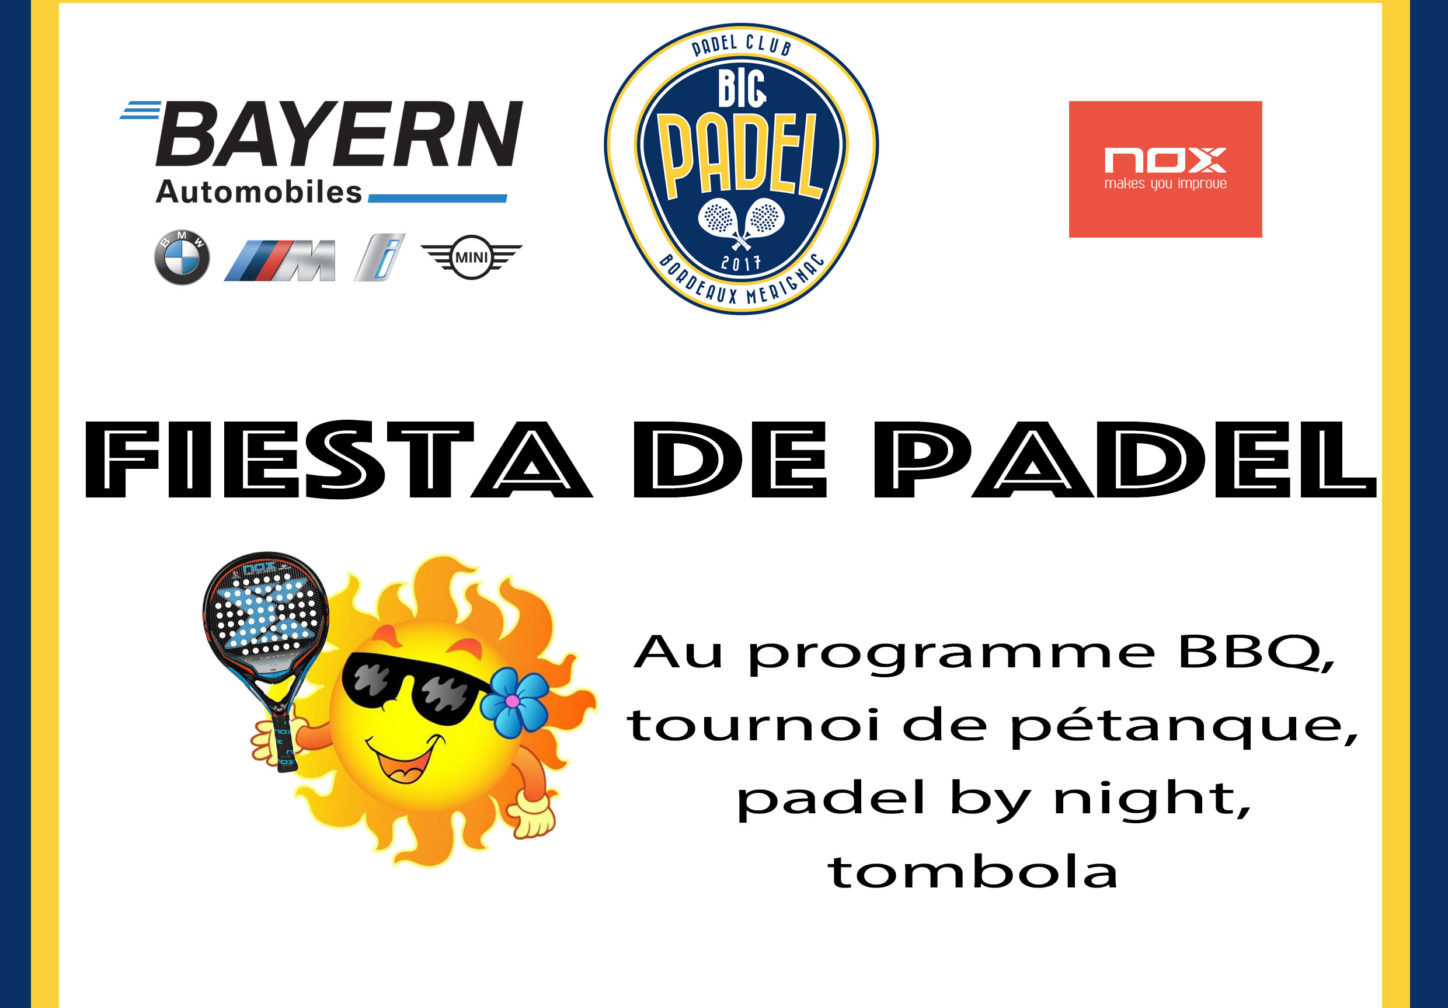 The BIG PADEL in BIG FIESTA mode on July 21 and 22